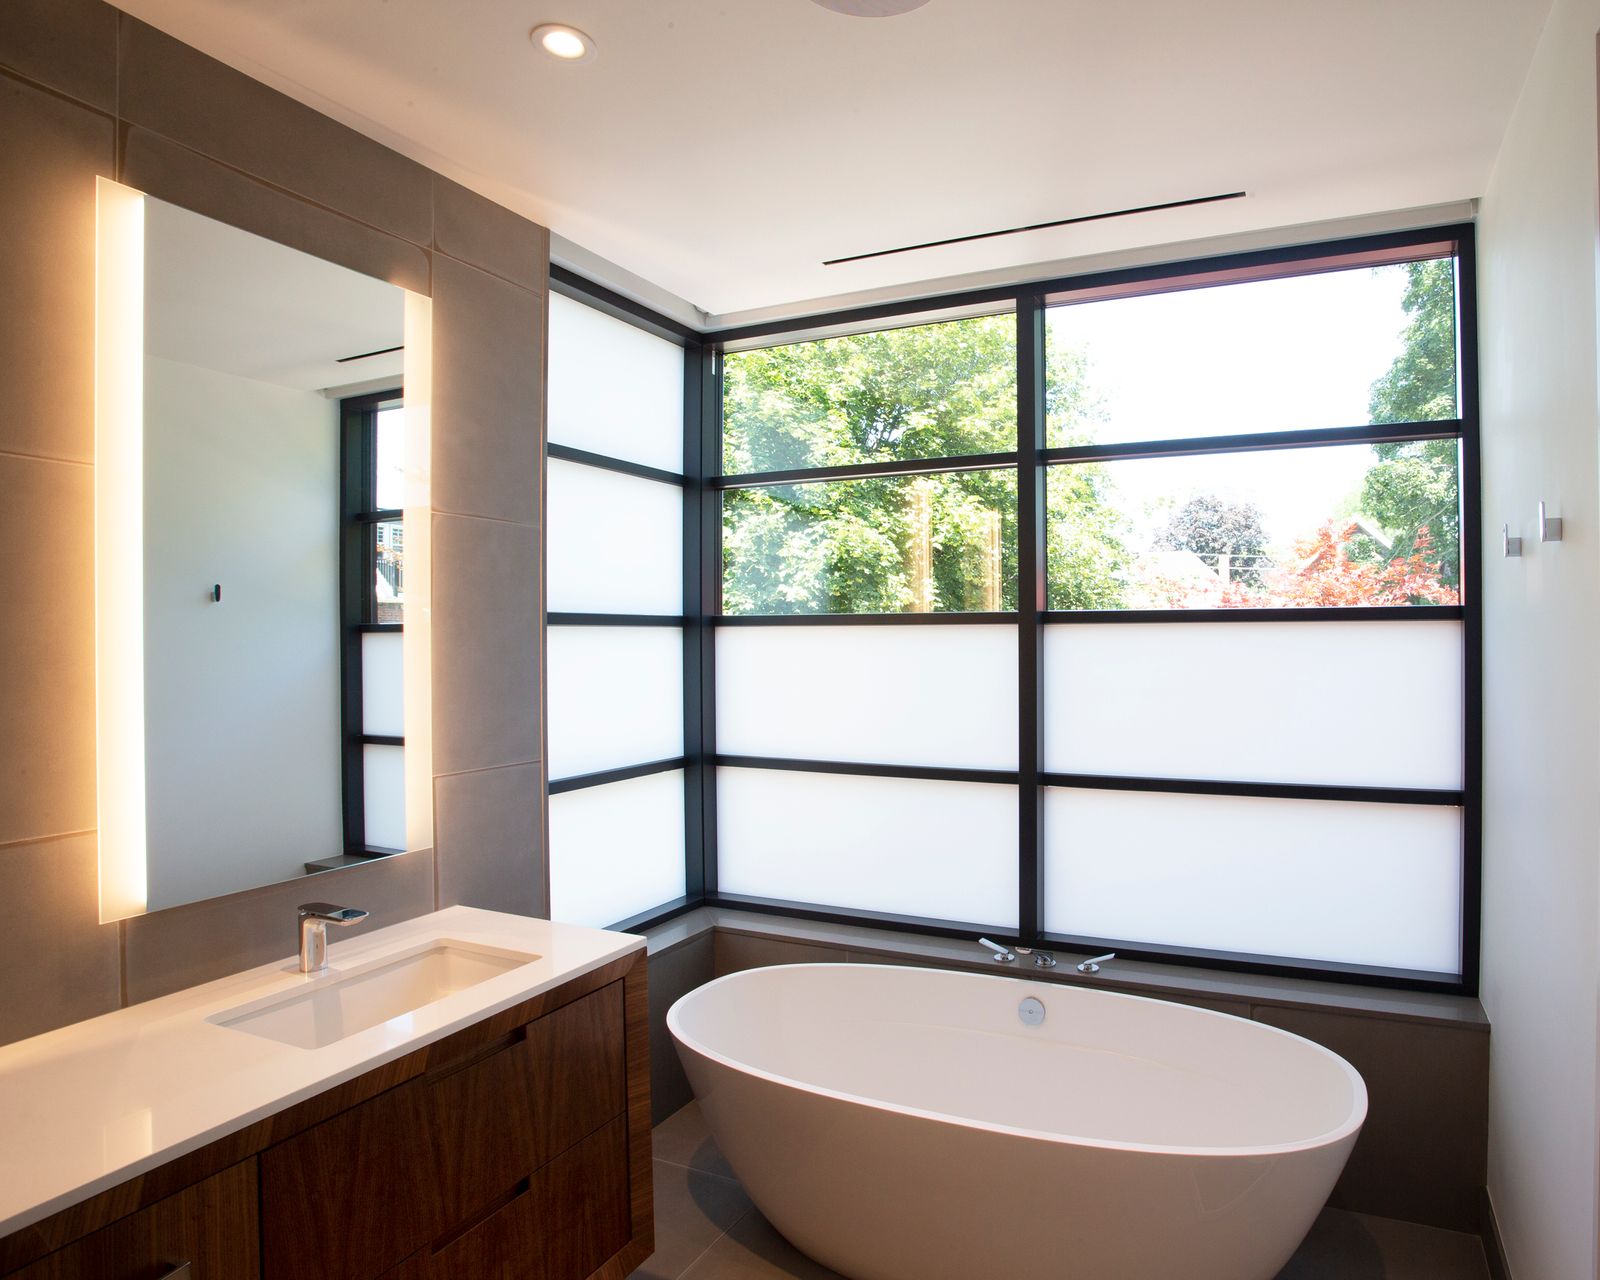 Modern bathroom with soaker tub by window and backlit mirror